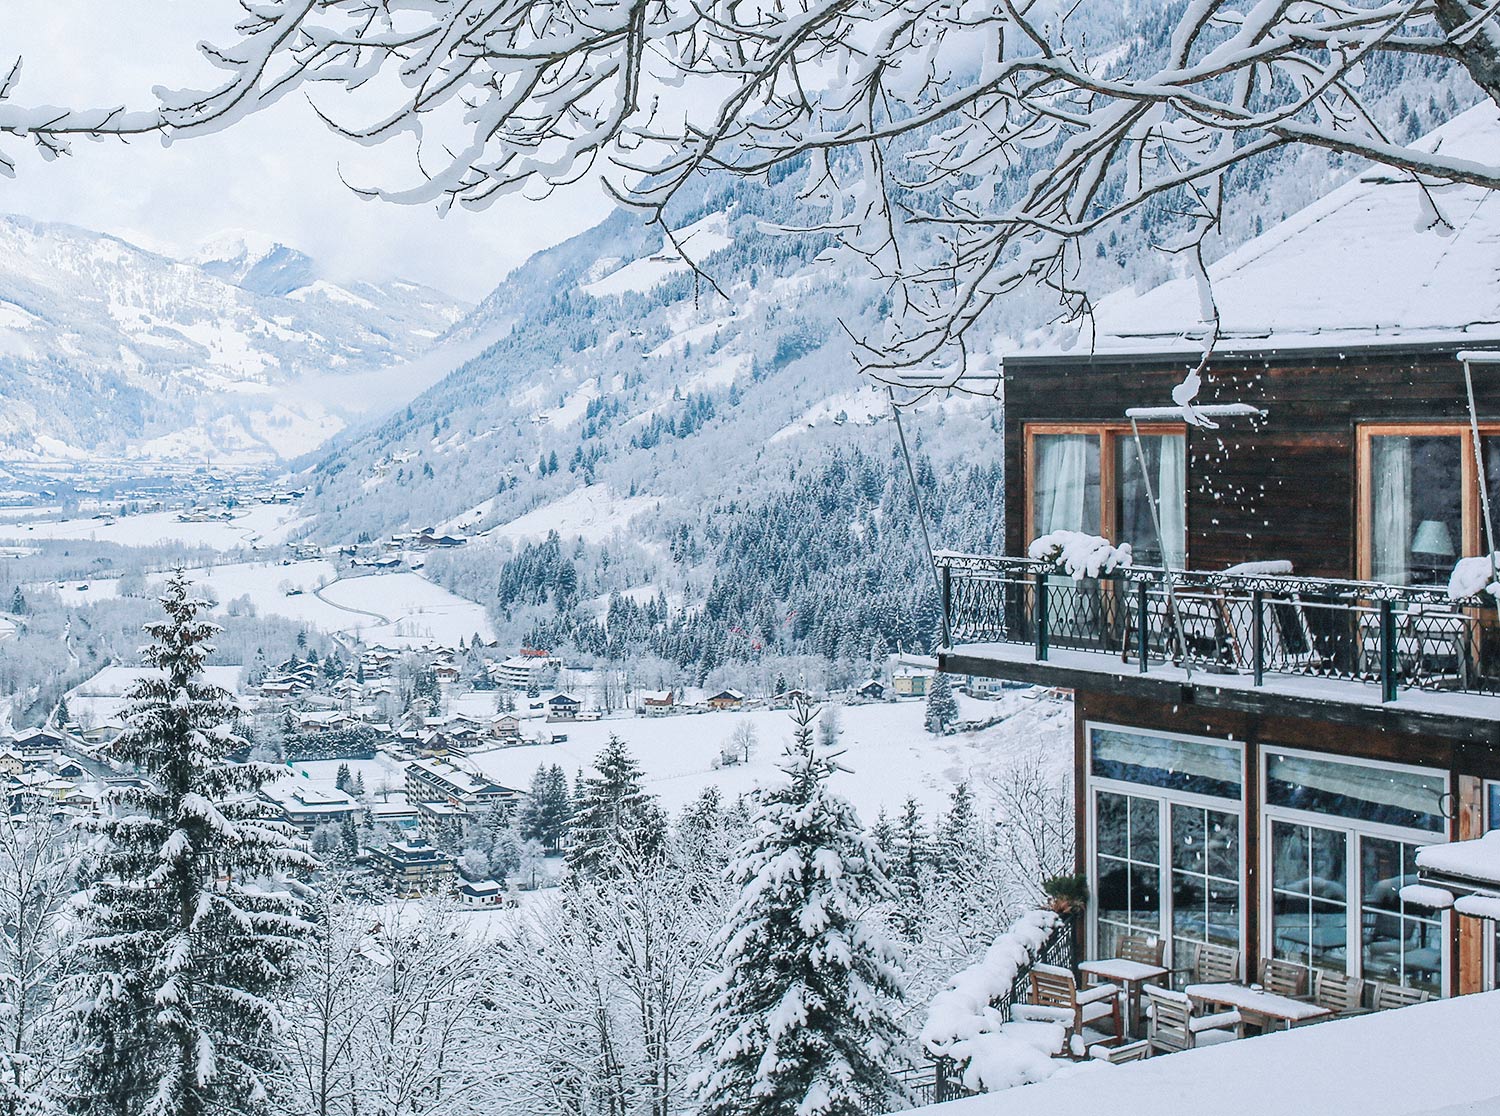 Pretty Hotels: Where to Stay in Your Ski Holidays (Image 13)